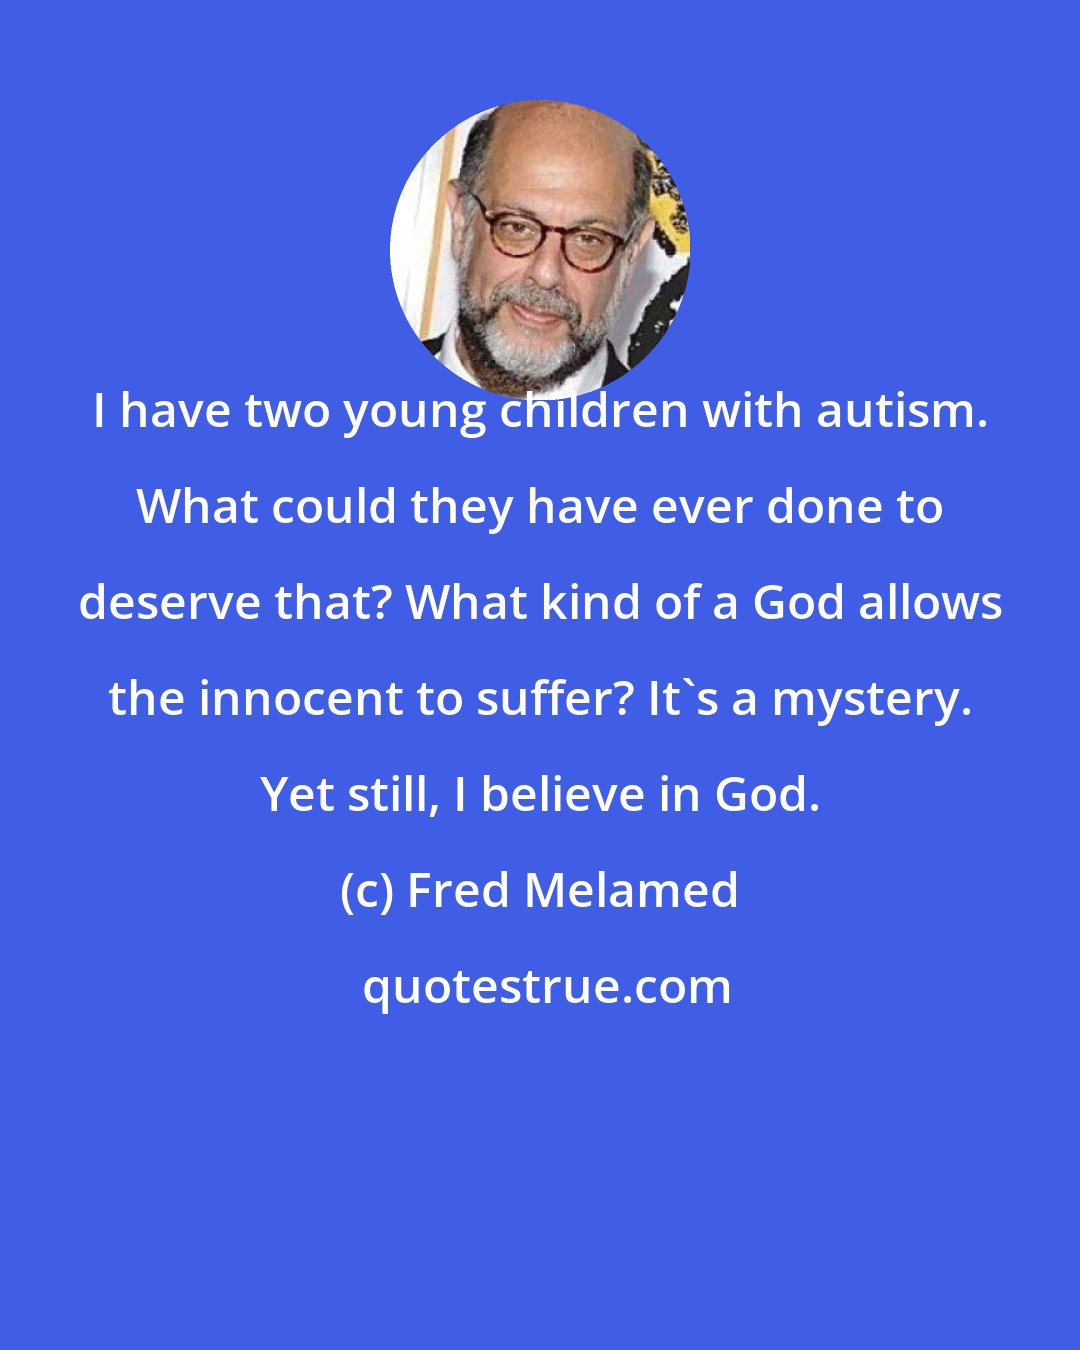 Fred Melamed: I have two young children with autism. What could they have ever done to deserve that? What kind of a God allows the innocent to suffer? It's a mystery. Yet still, I believe in God.